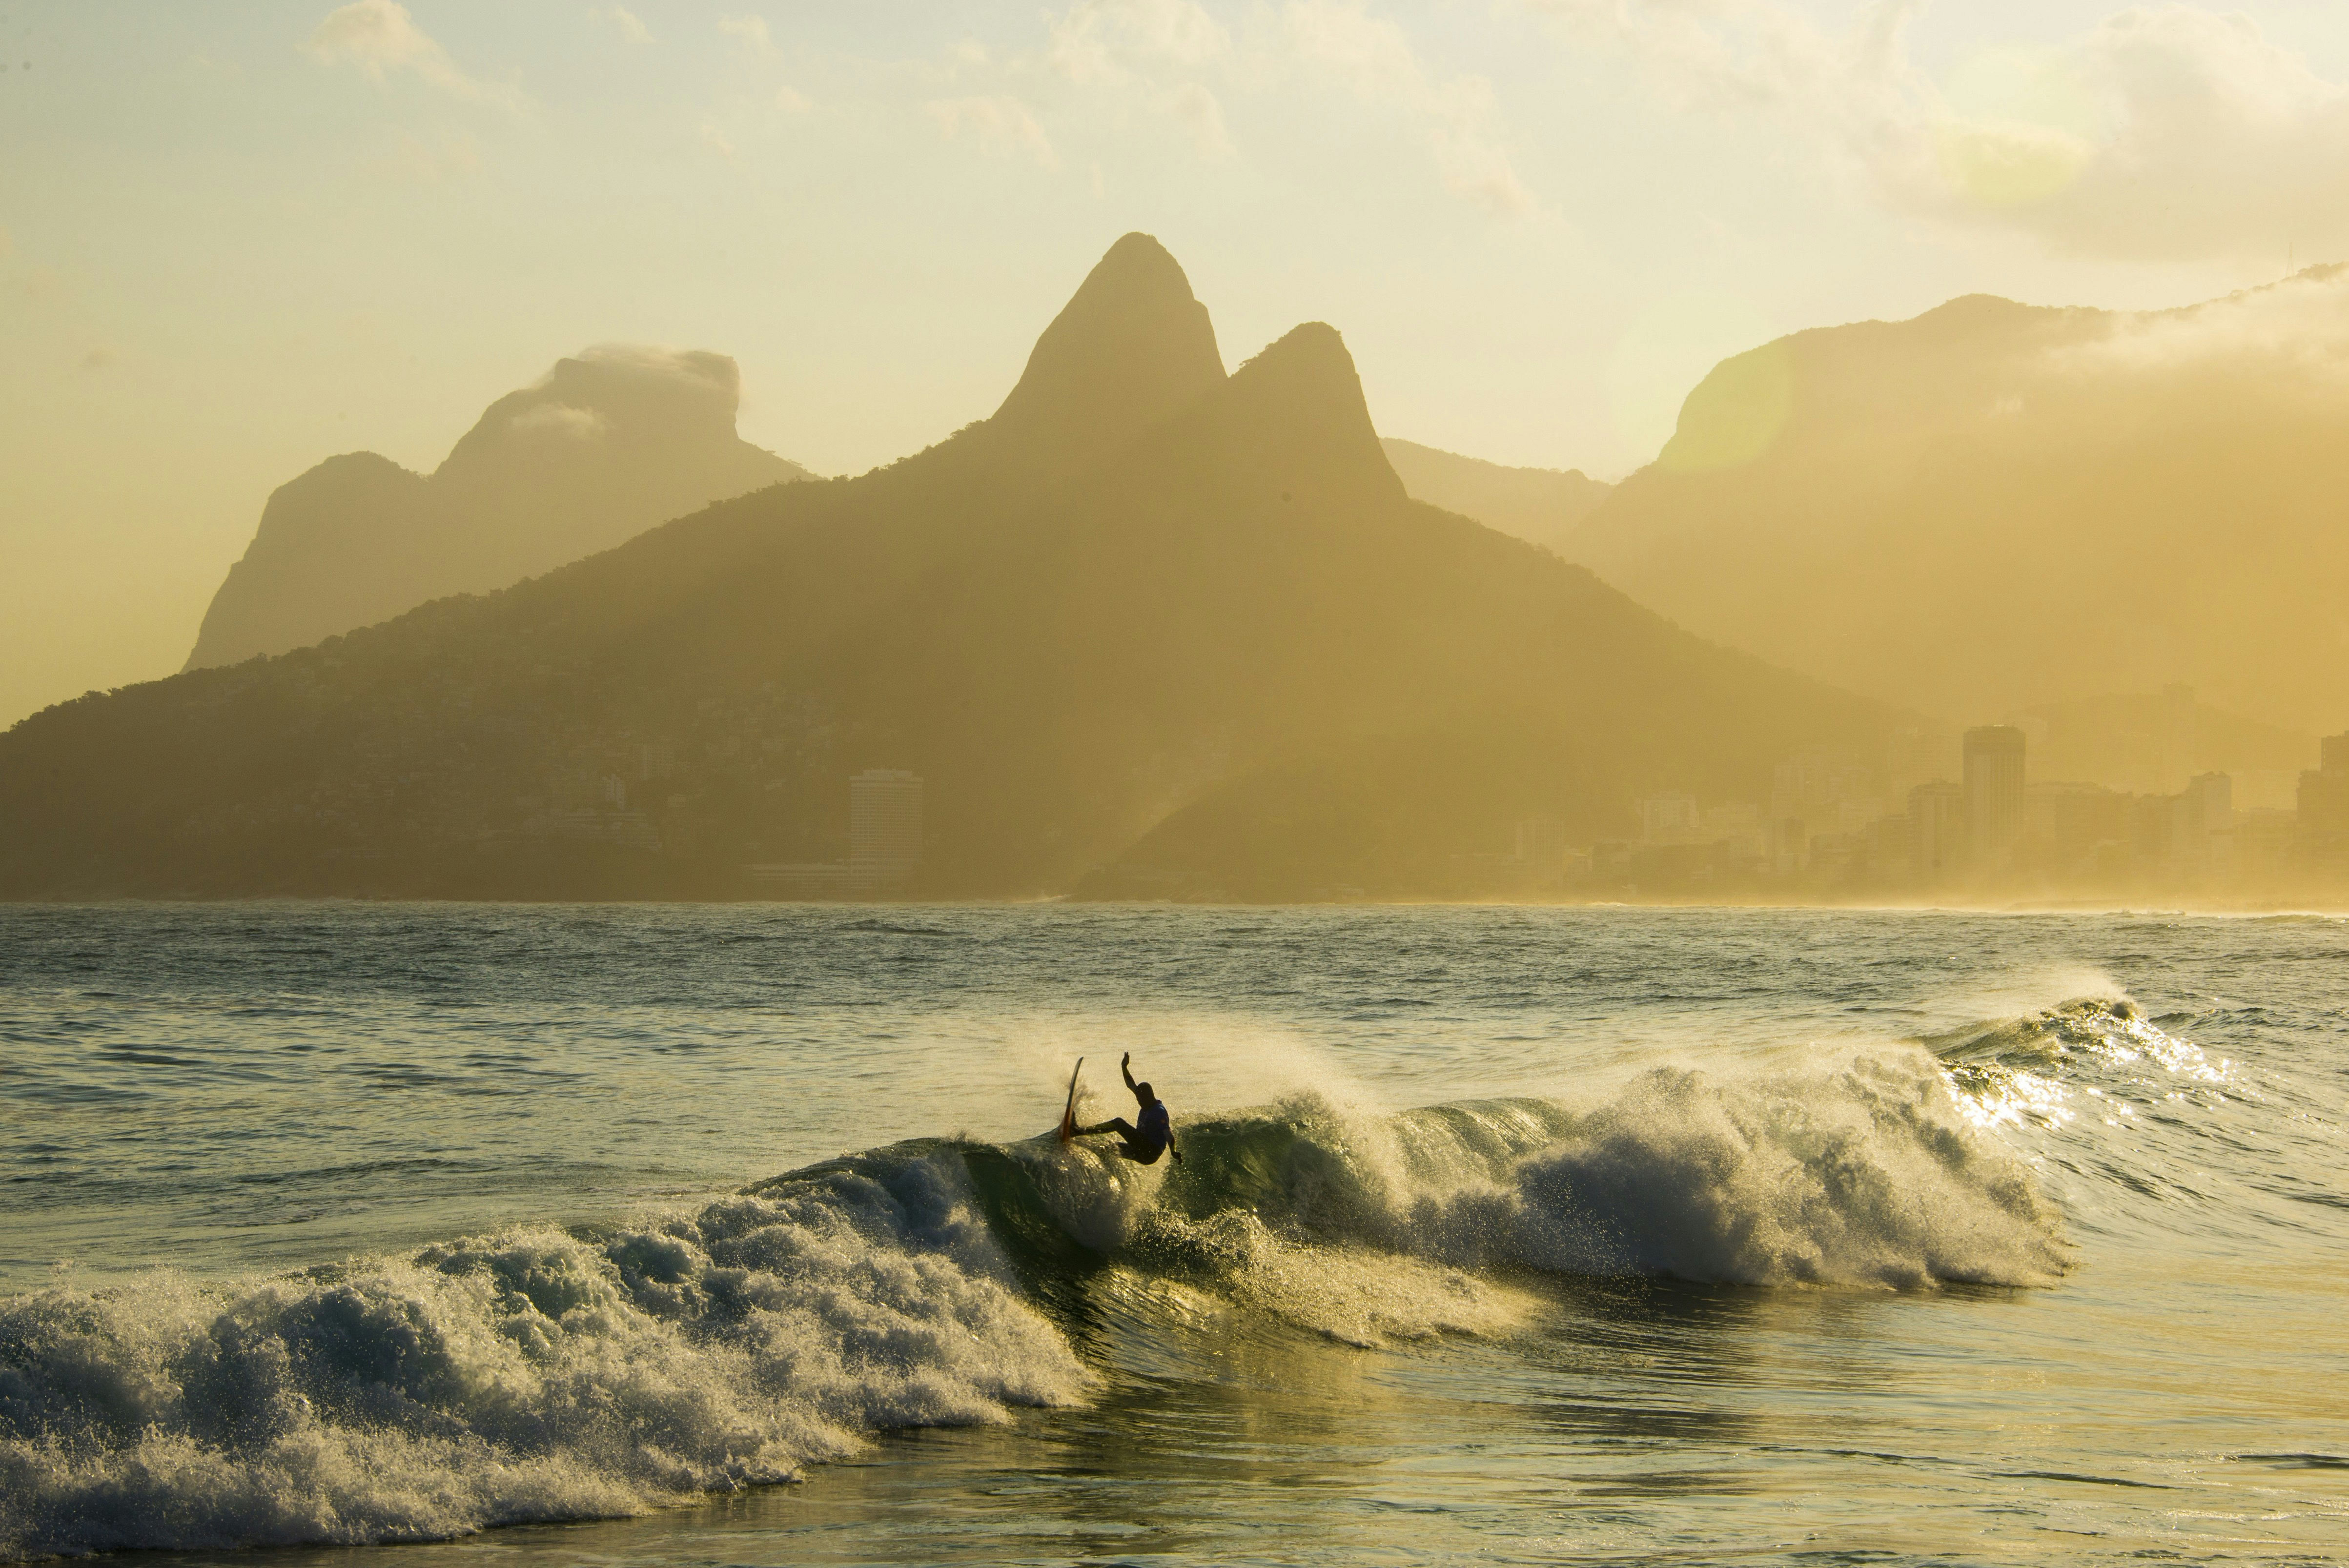 A surfer riding the very top of a crashing wave on Ipanema beach, with the distinctive silhouettes of Rio's mountains in the background.